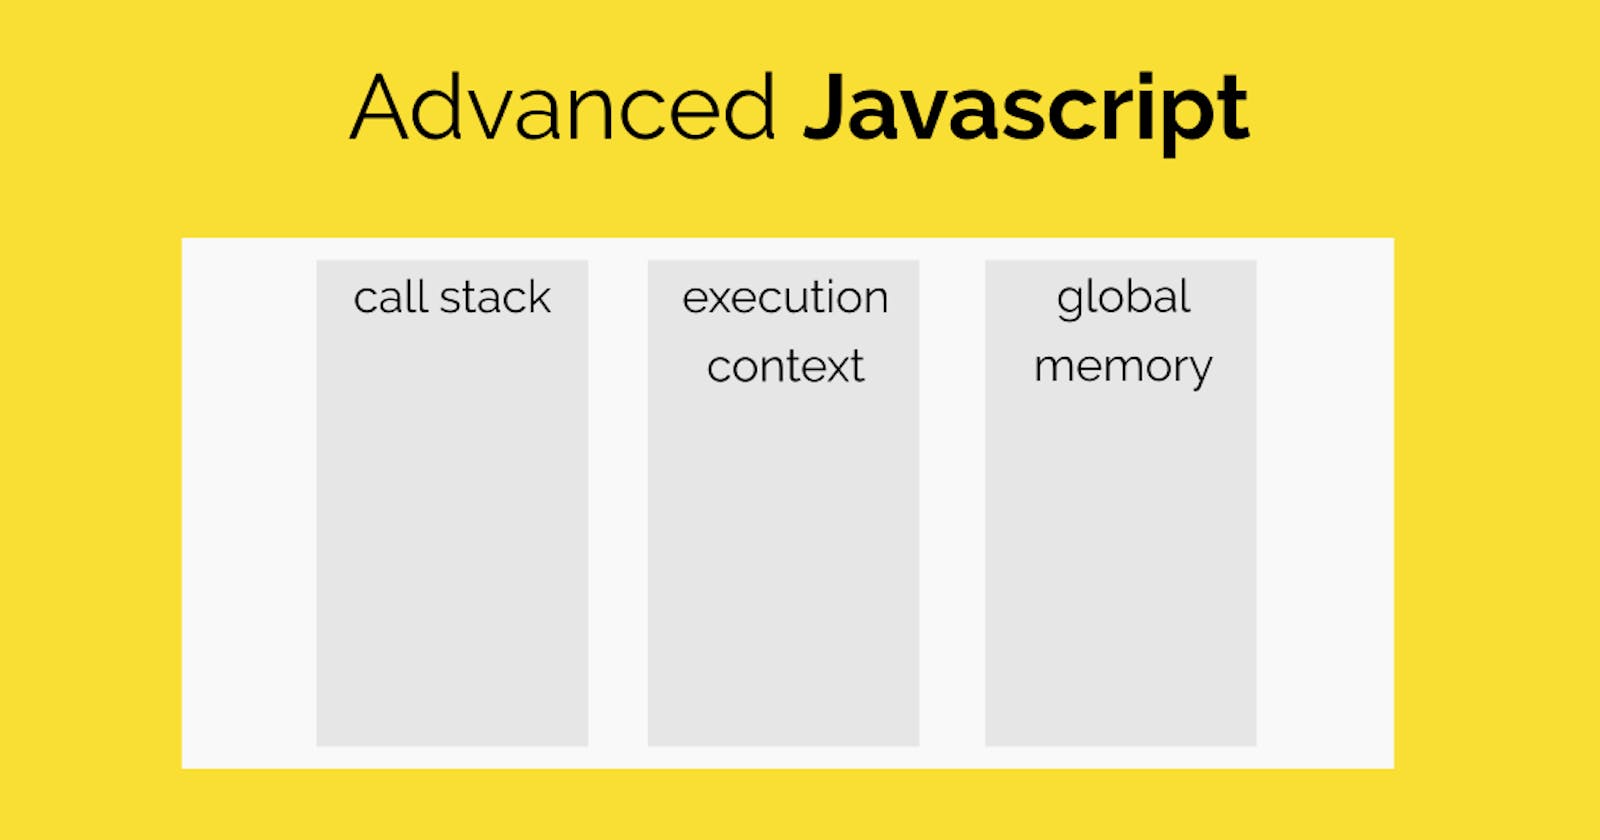 Thread Of Execution And Call Stack In Javascript